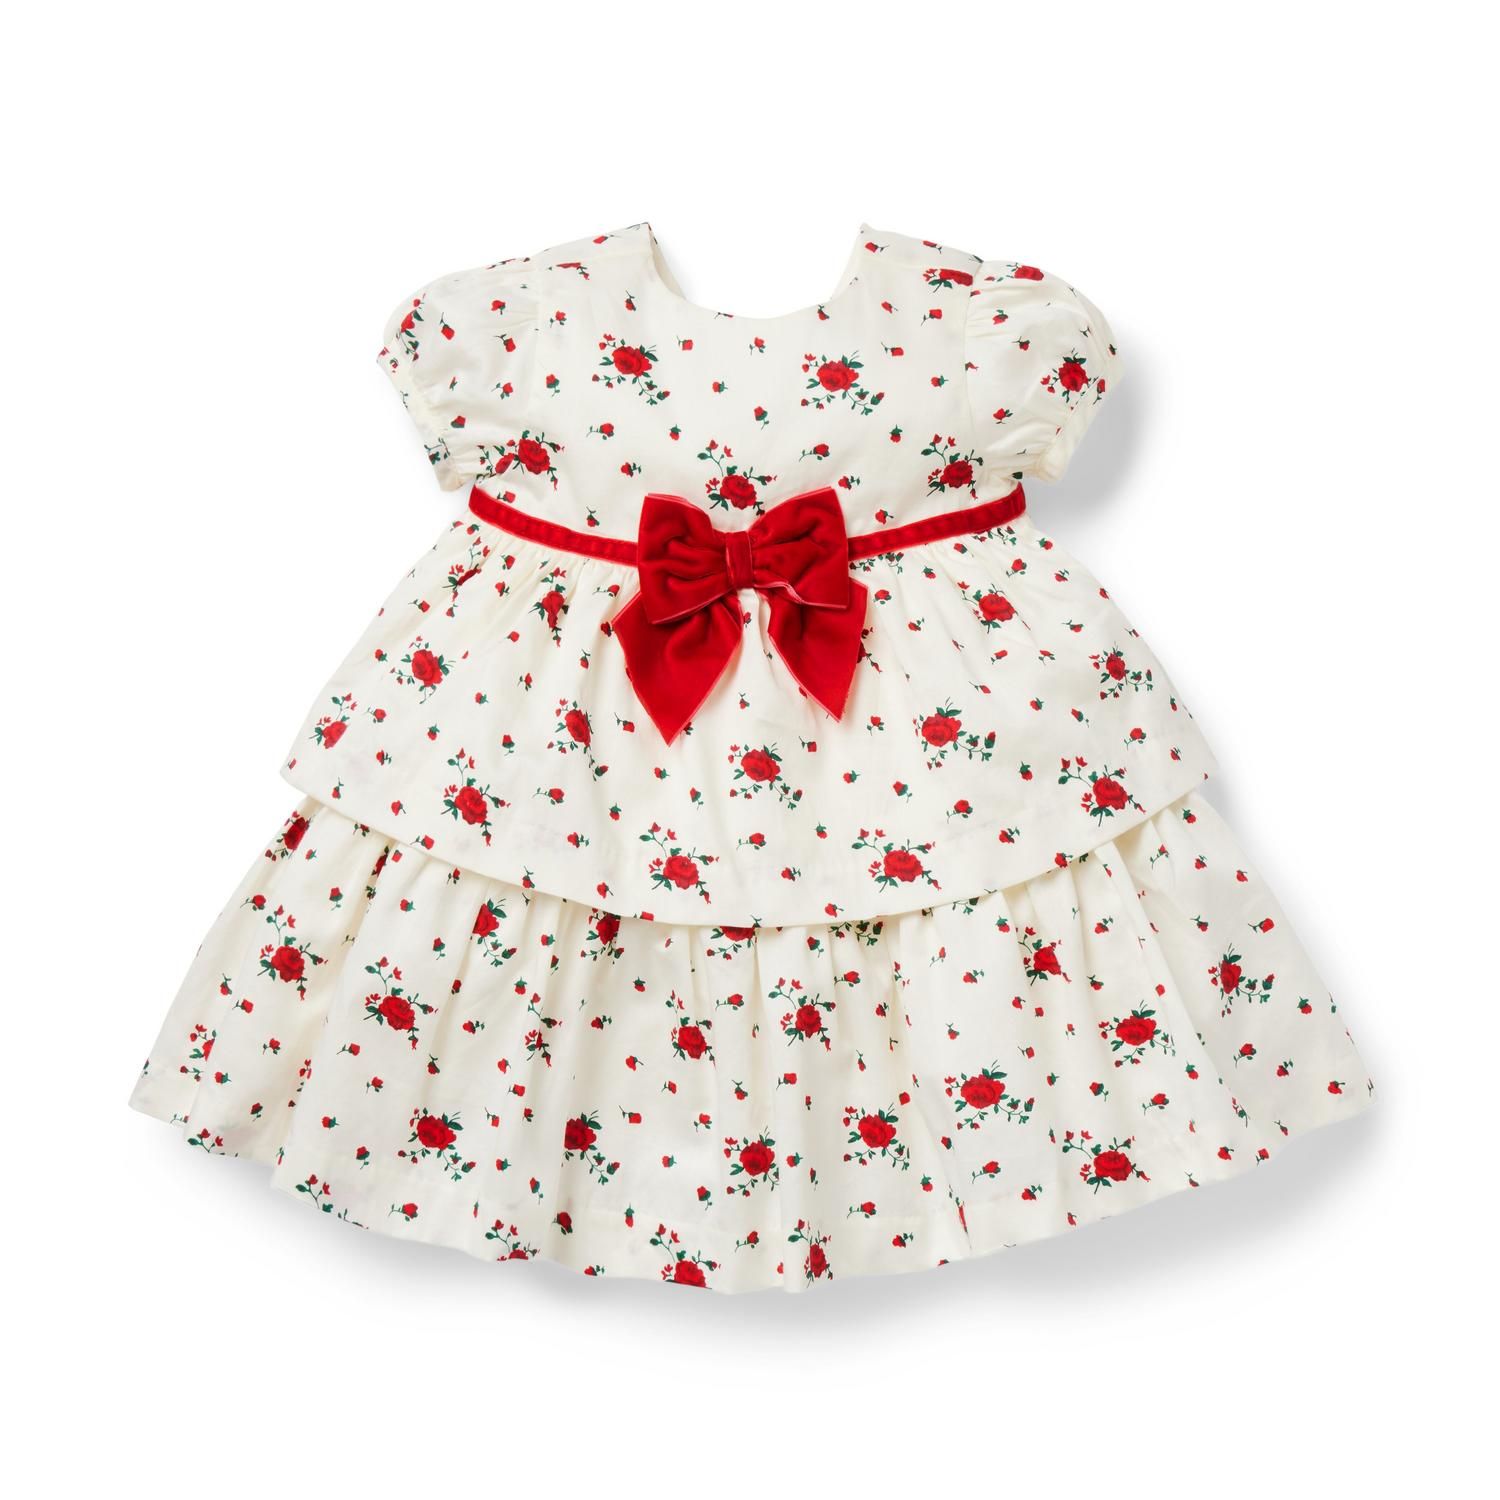 The Rose Party Baby Dress | Janie and Jack